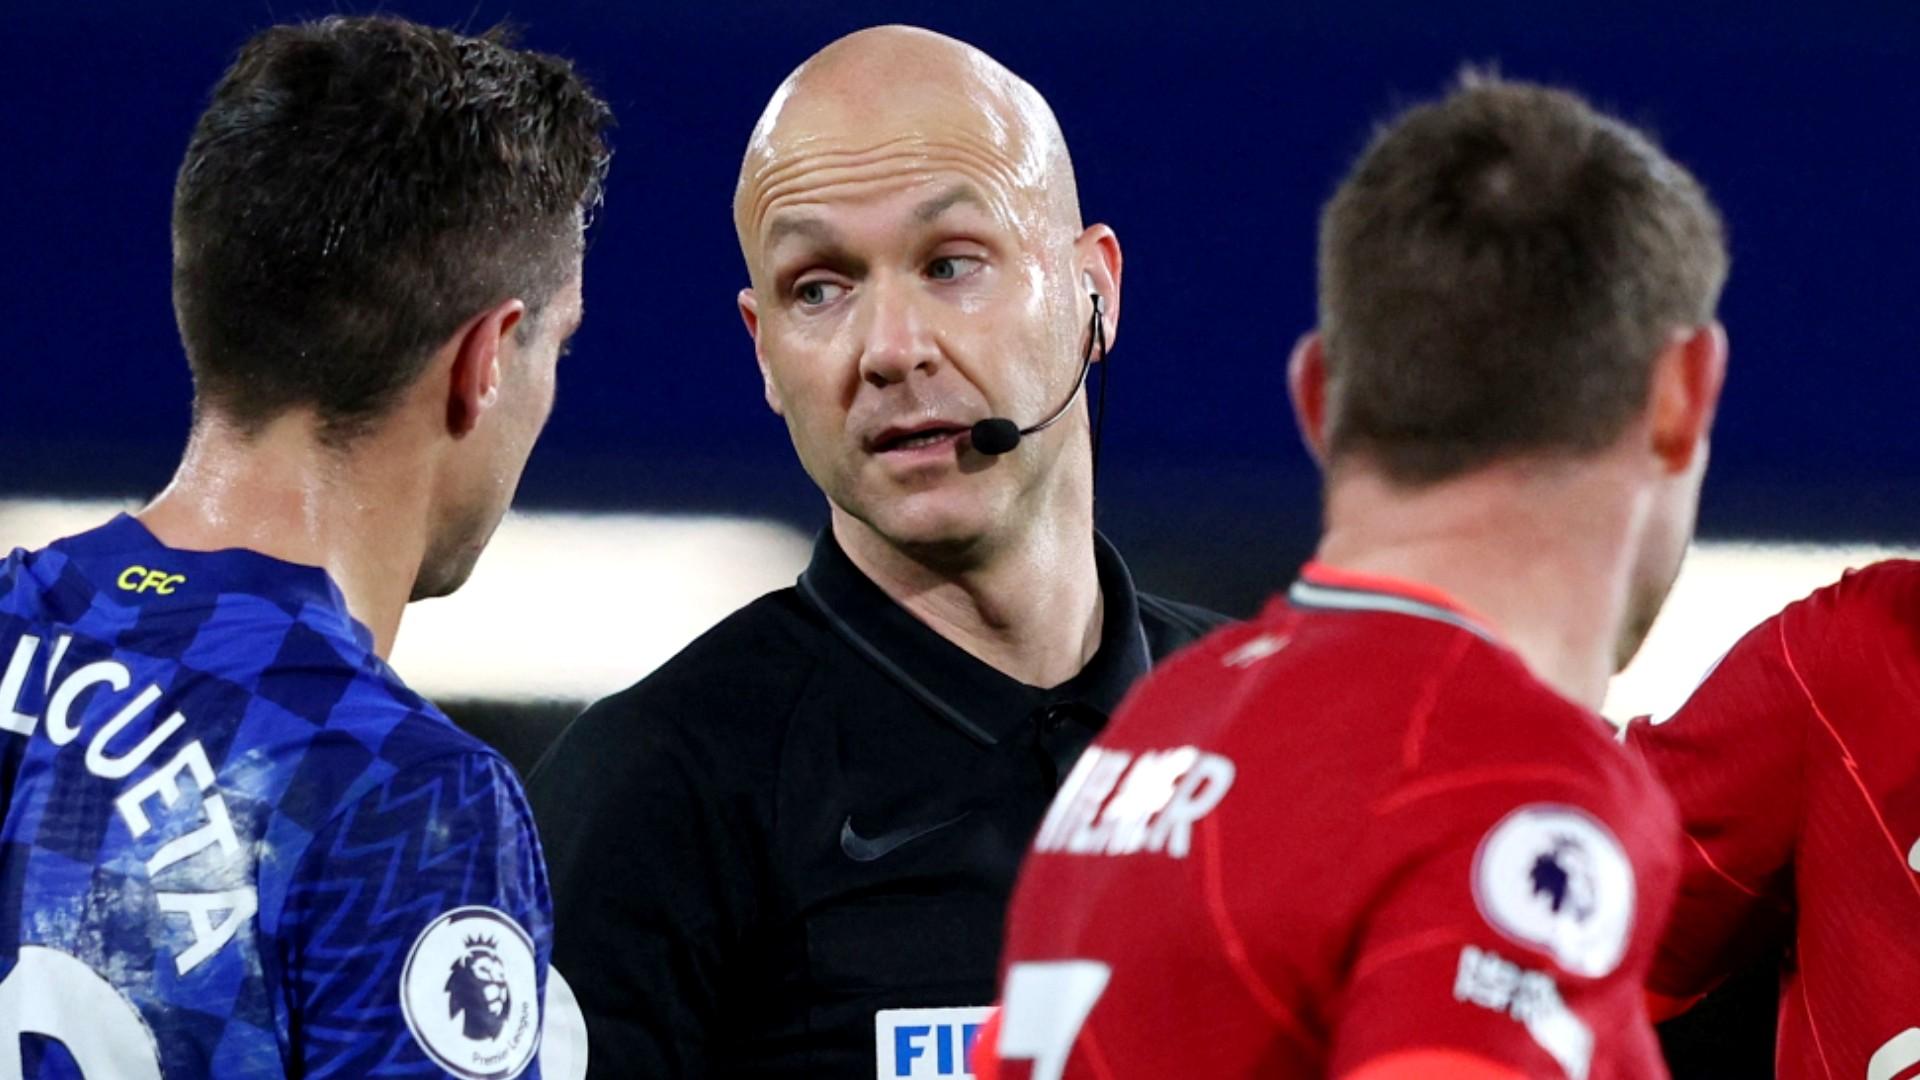 Ben Foster reveals shocking truth about Premier League Referees